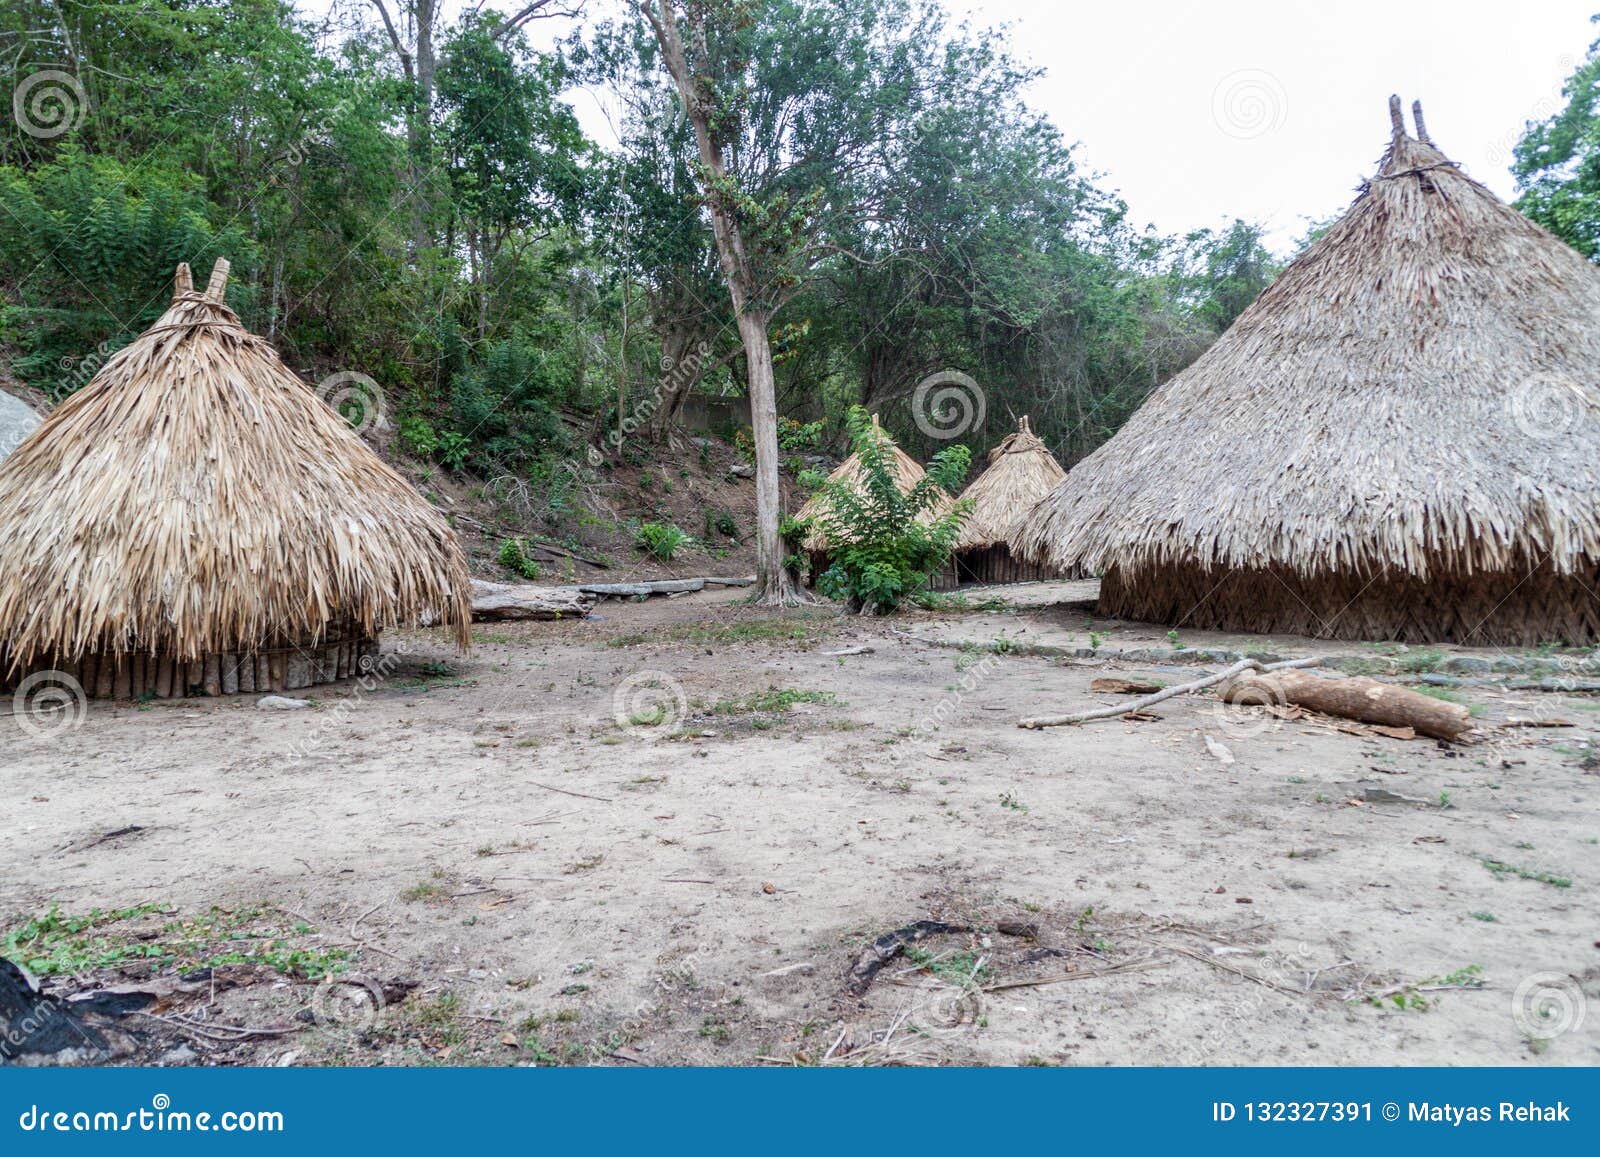 traditional rustic houses of indigenous kogi people